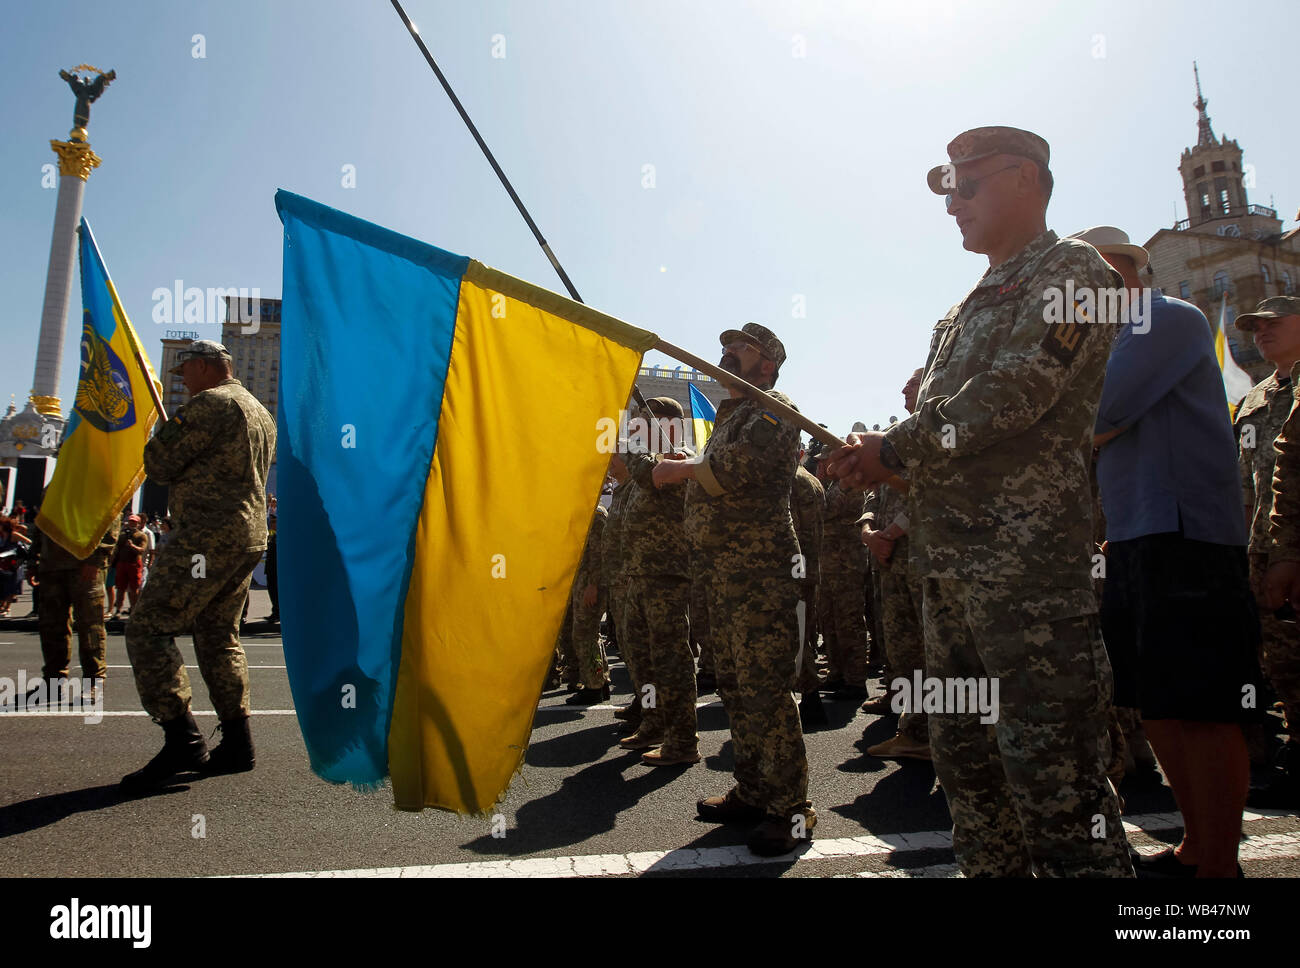 A Ukrainian serviceman holds a Ukrainian flag while marching at the Independence Square during the Anniversary.Ukraine marks the 28th Independence Day Anniversary from the Soviet Union since 1991 on August 24, 2019. Stock Photo